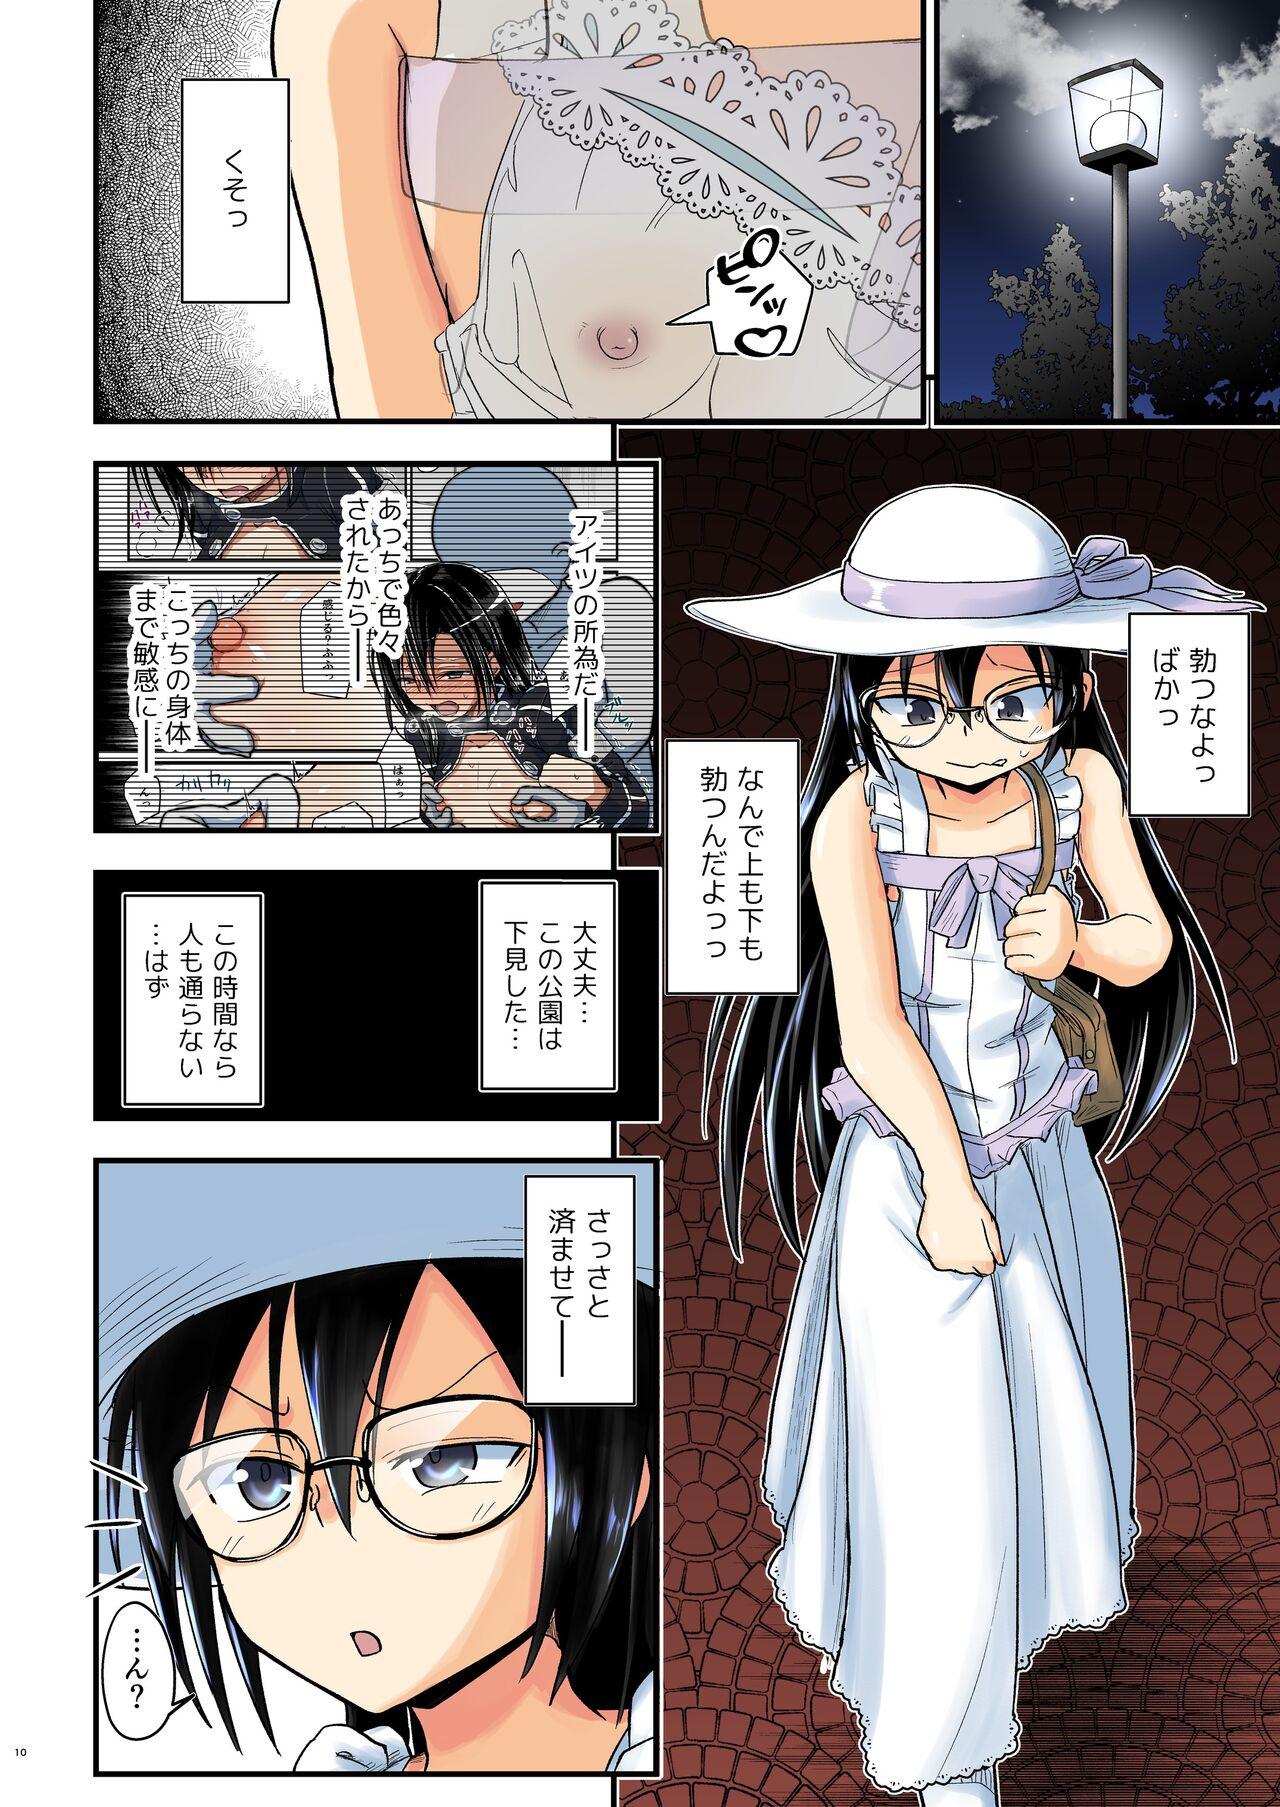 Stepsister Kiriko Route Another #07 - Sword art online Exhibitionist - Page 10